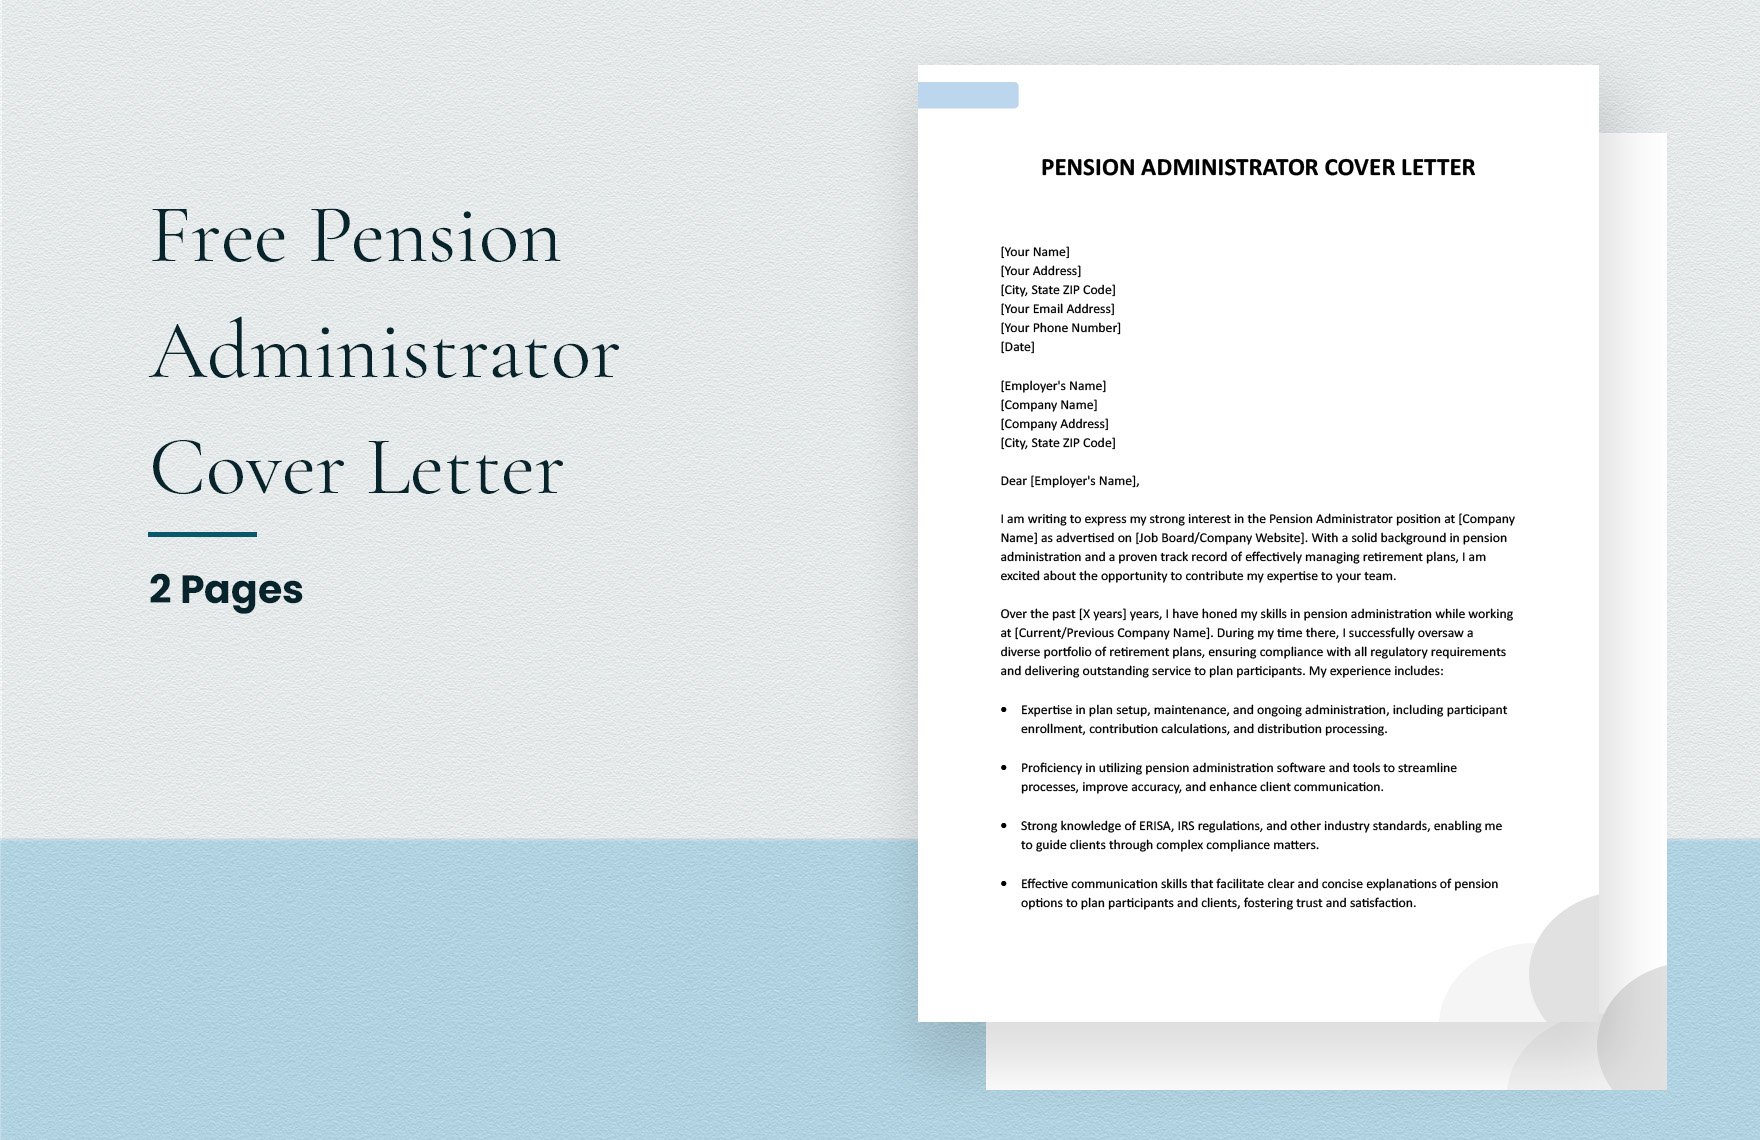 Pension Administrator Cover Letter in Word, Google Docs